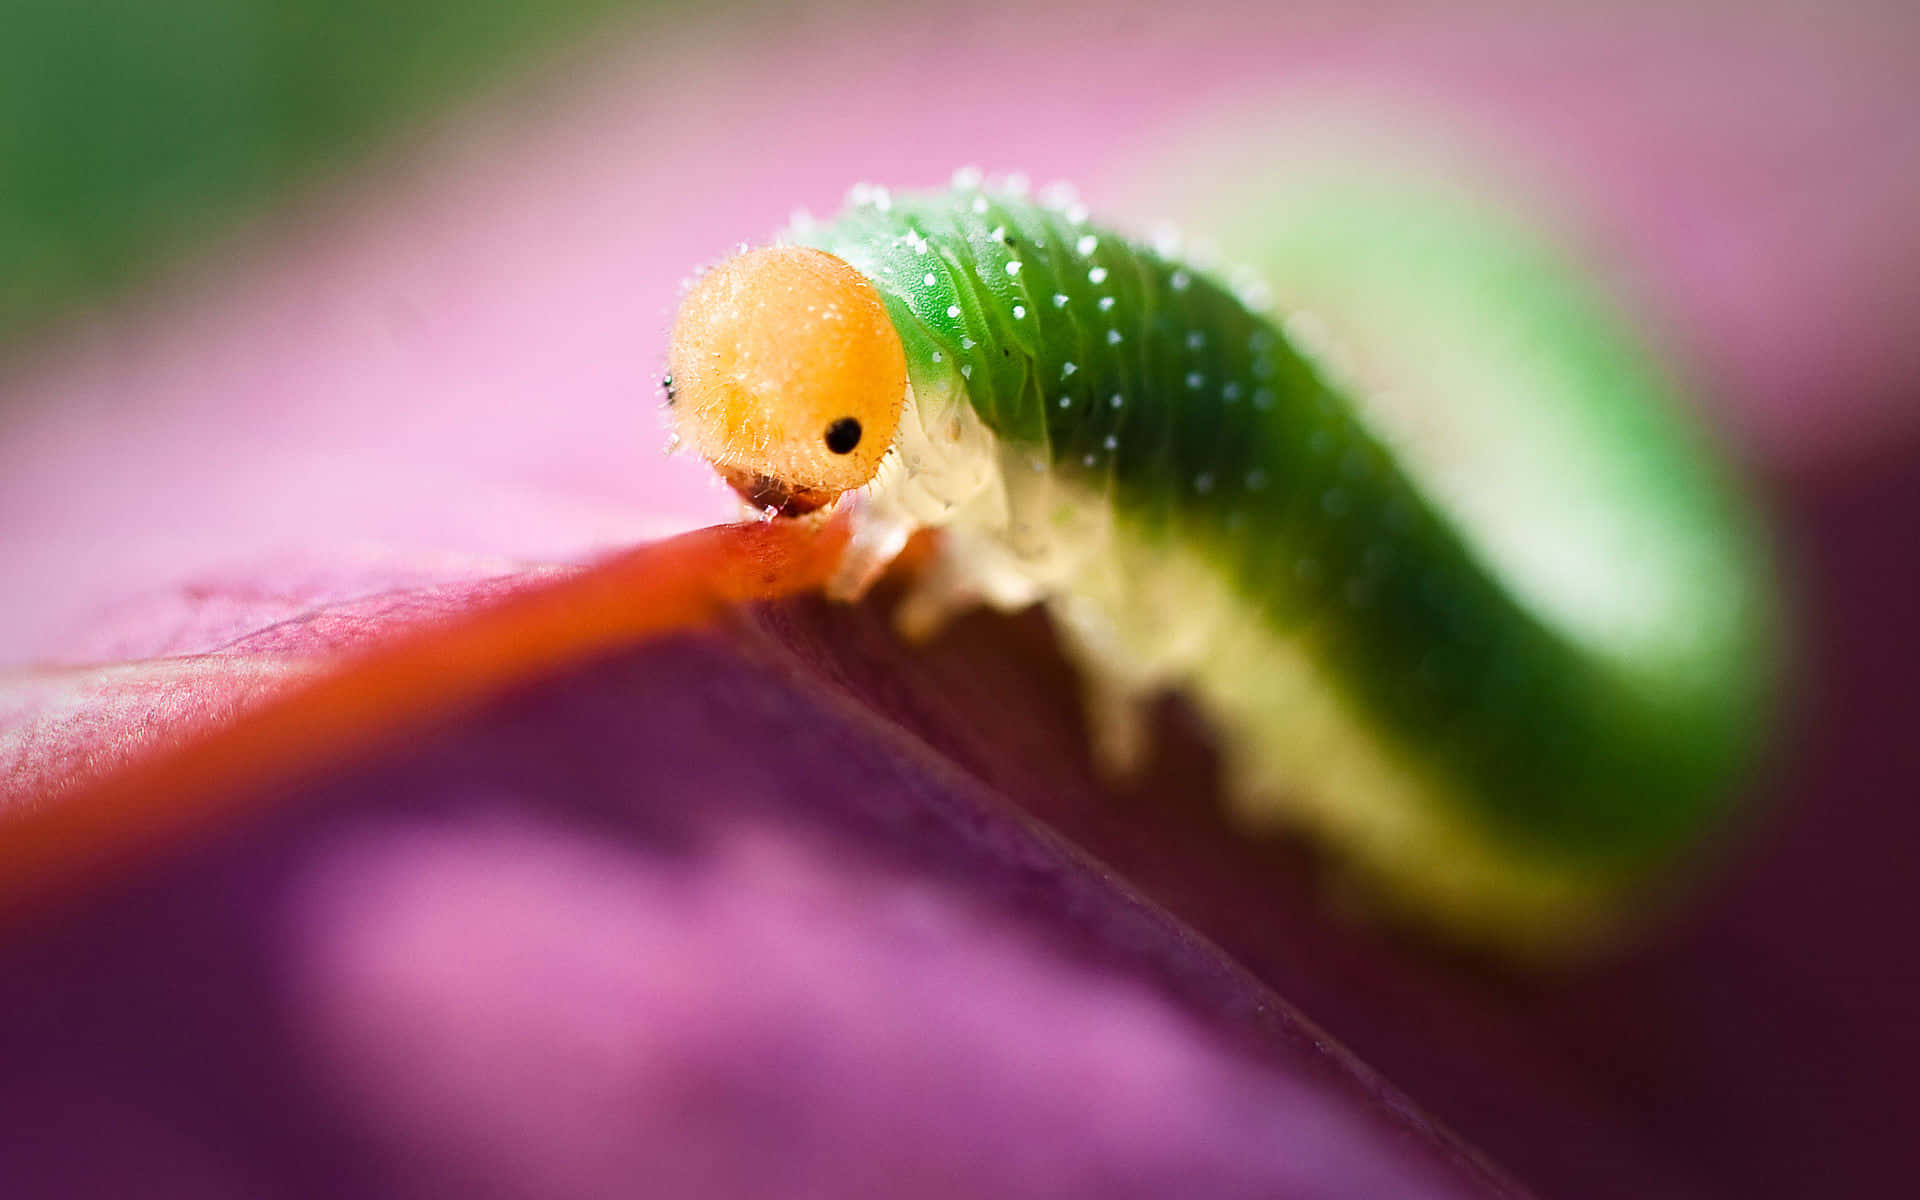 A Green And Yellow Cater Worm On A Leaf